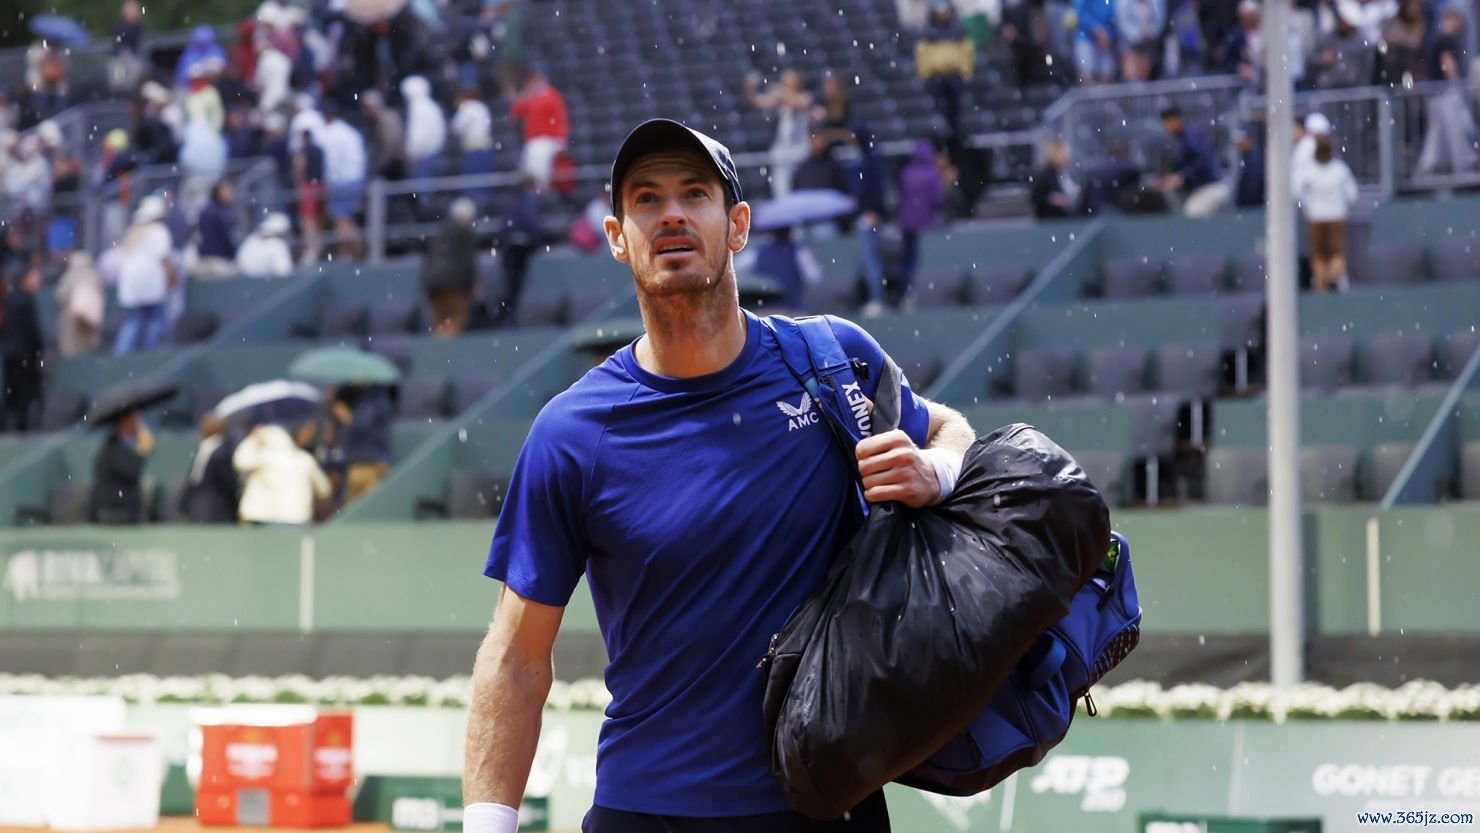 High winds, rain and white pollen disrupted Andy Murray's first-round match at the Geneva Open.